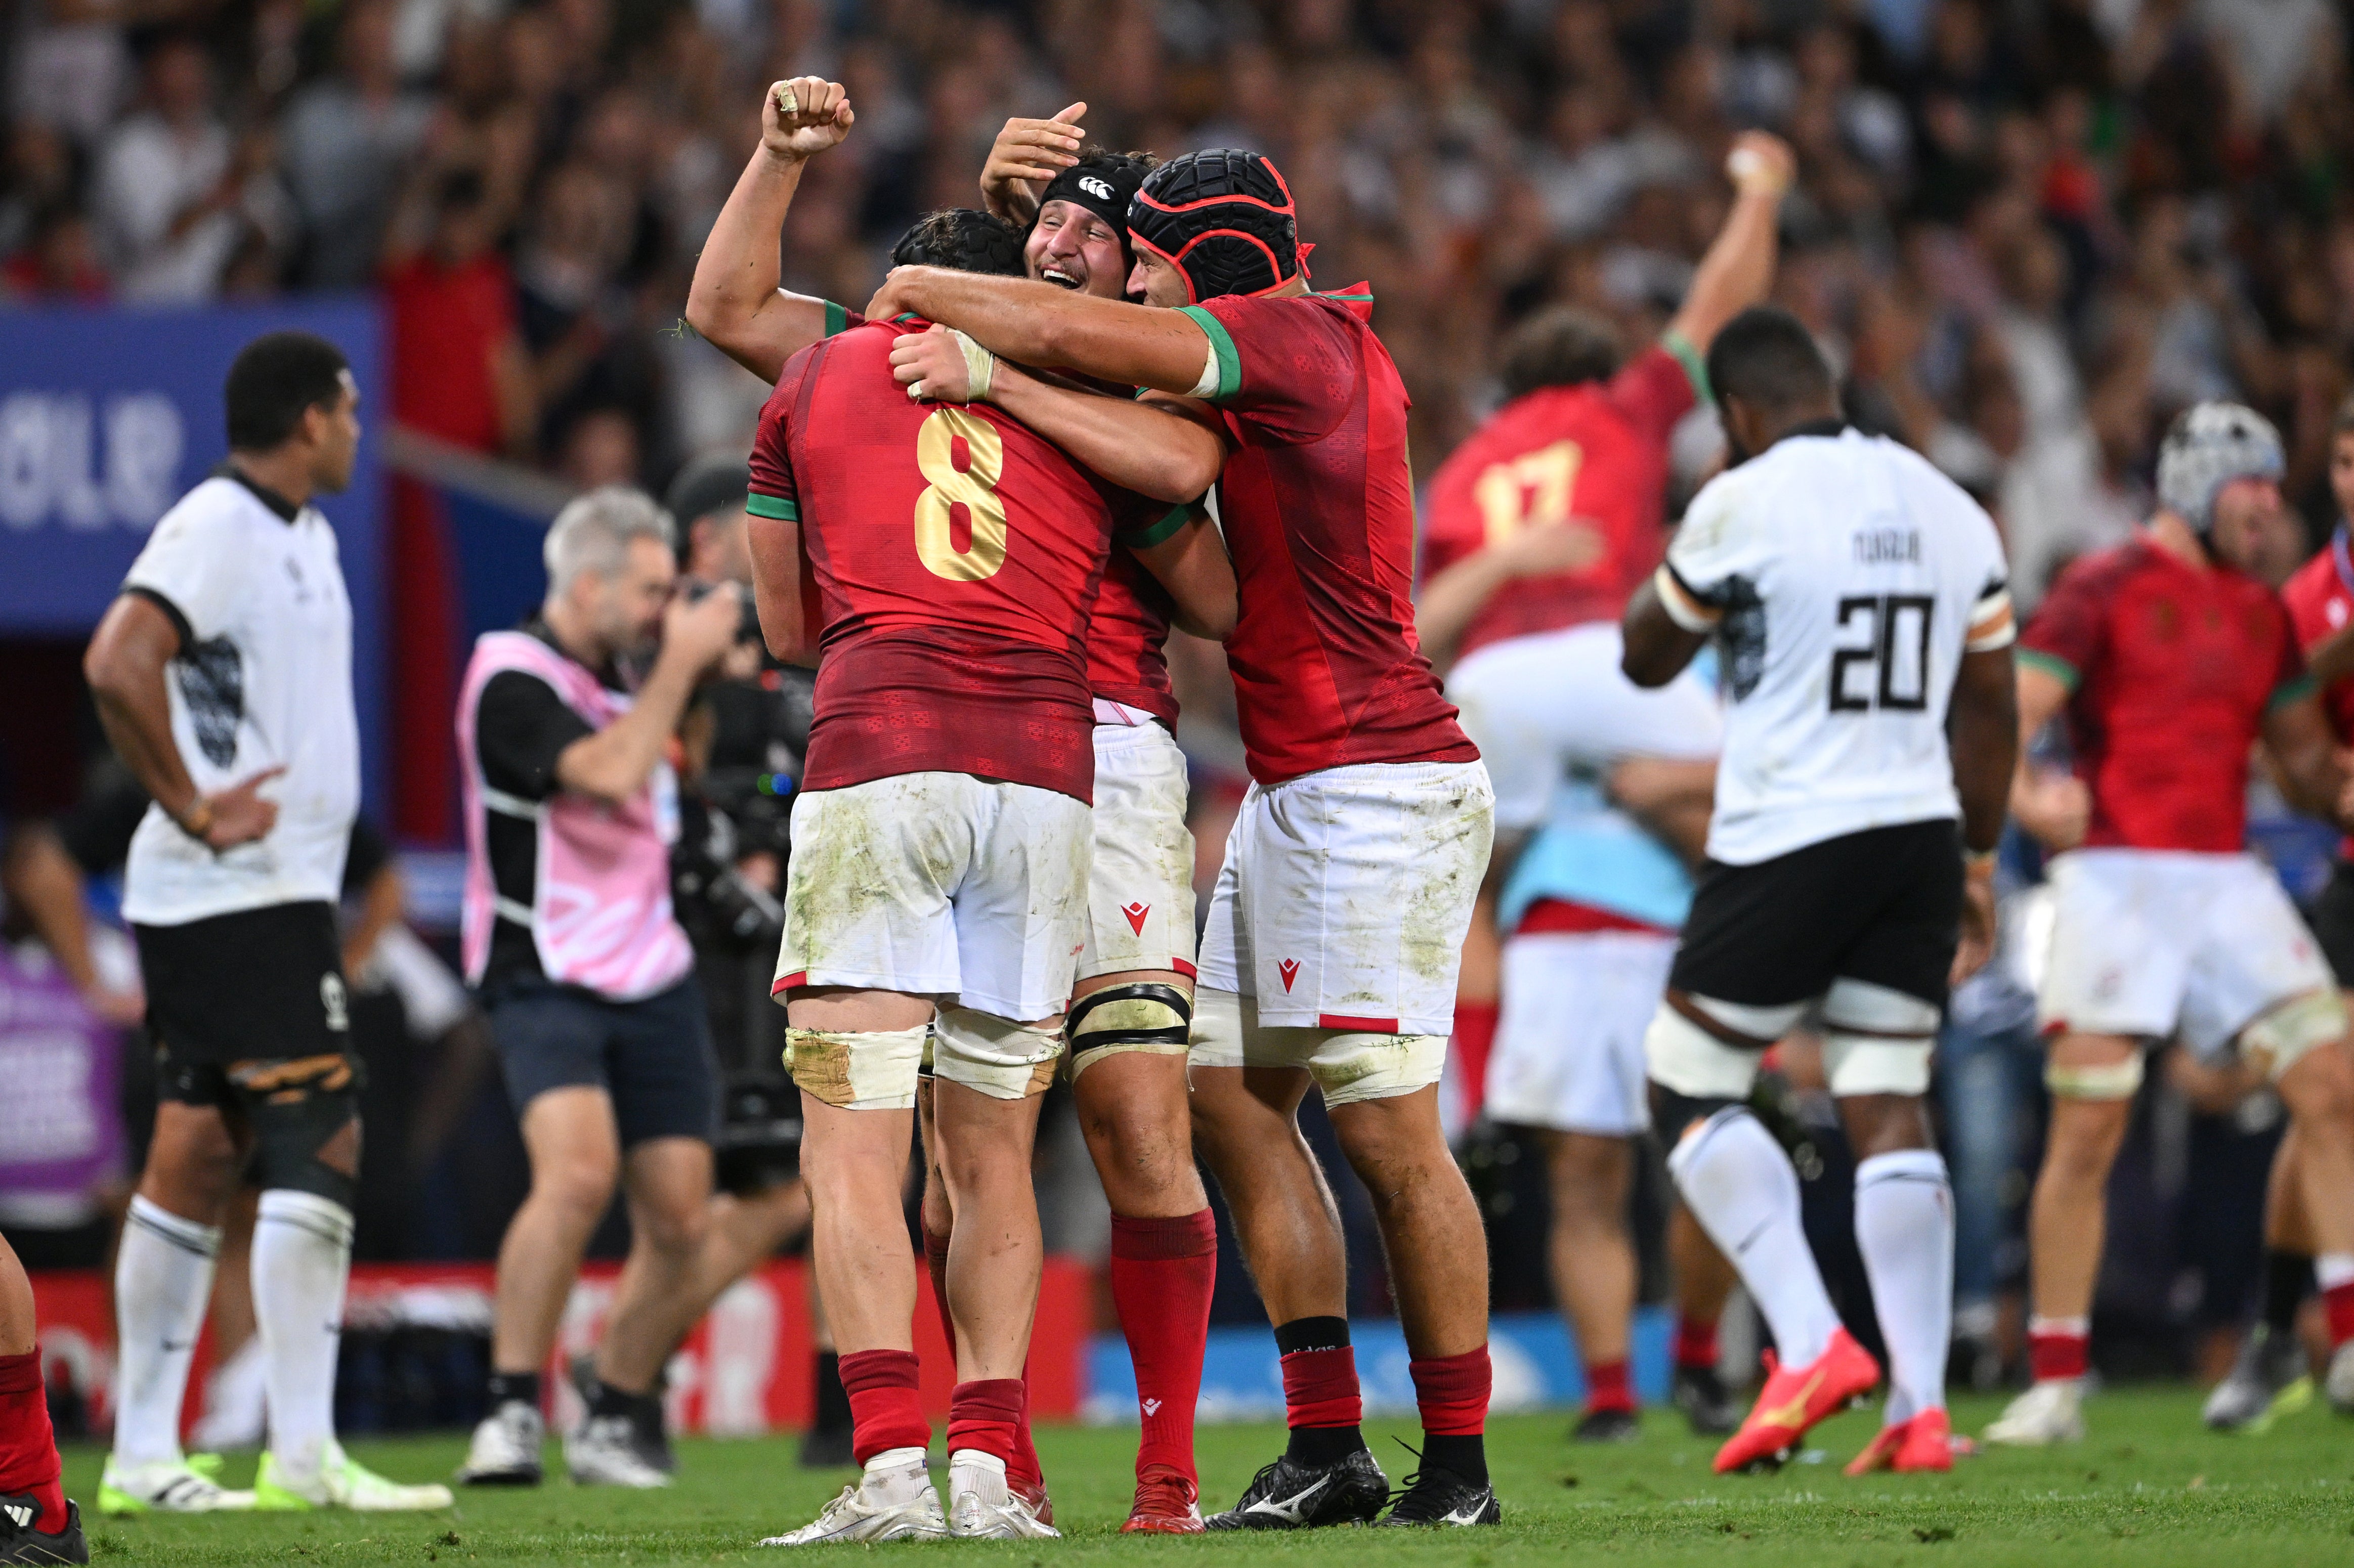 Portugal enjoyed a breakthrough Rugby World Cup